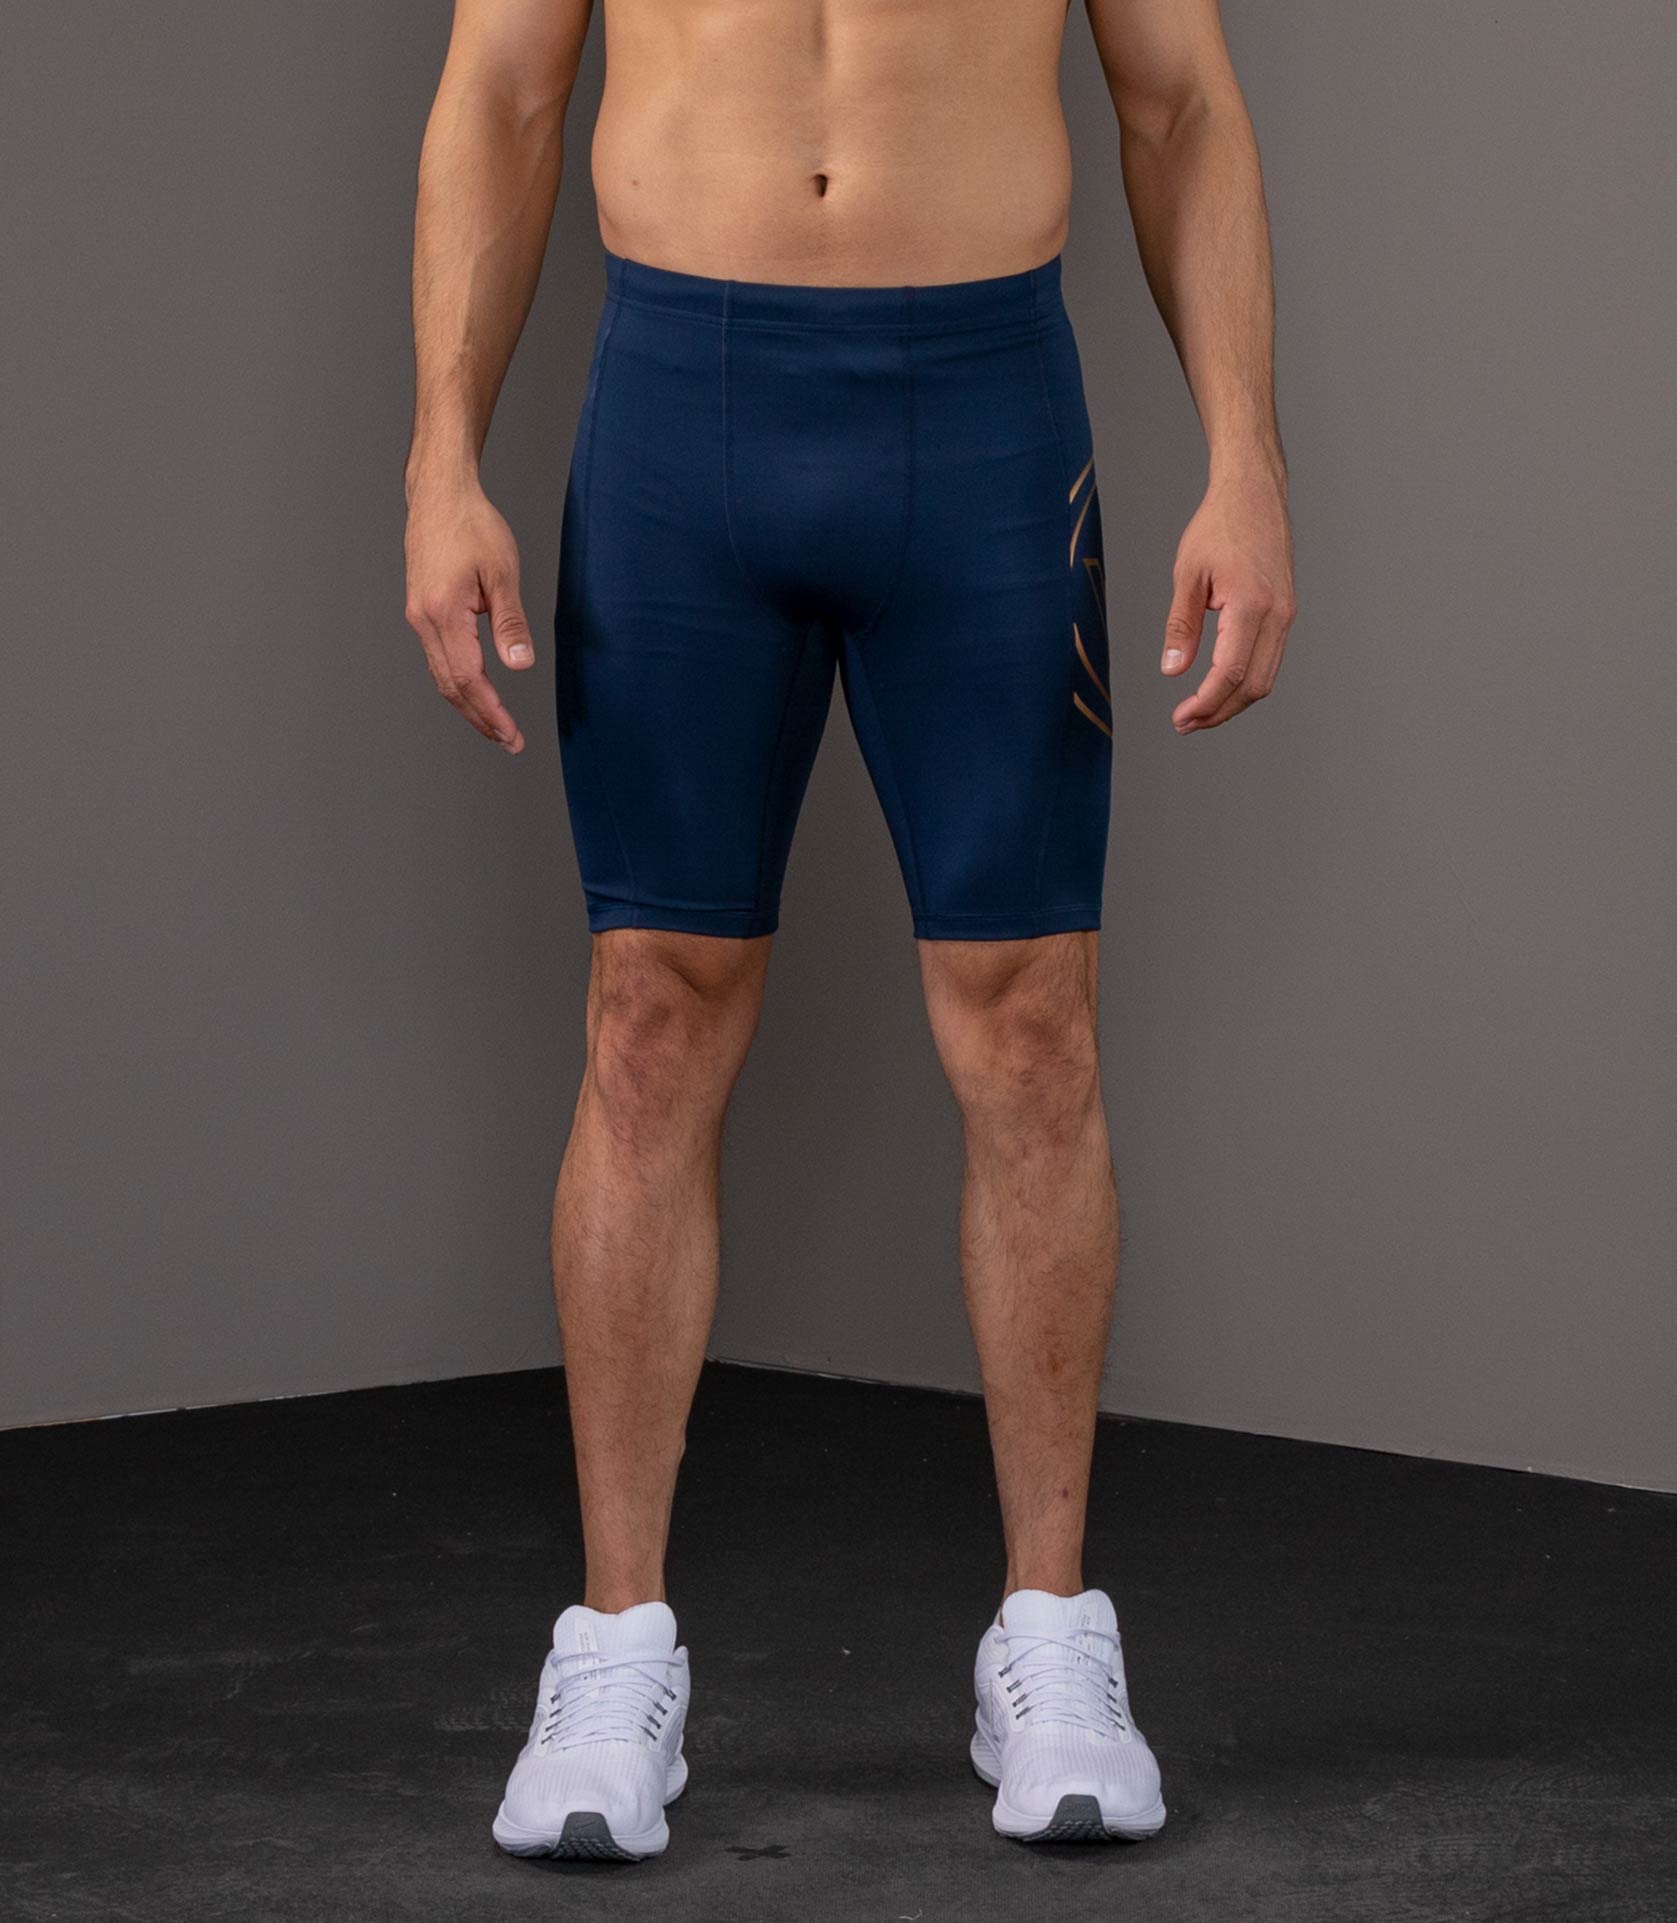 VIRUS on X: Men's Navy, Teal Co23 Compression Tech Shorts.